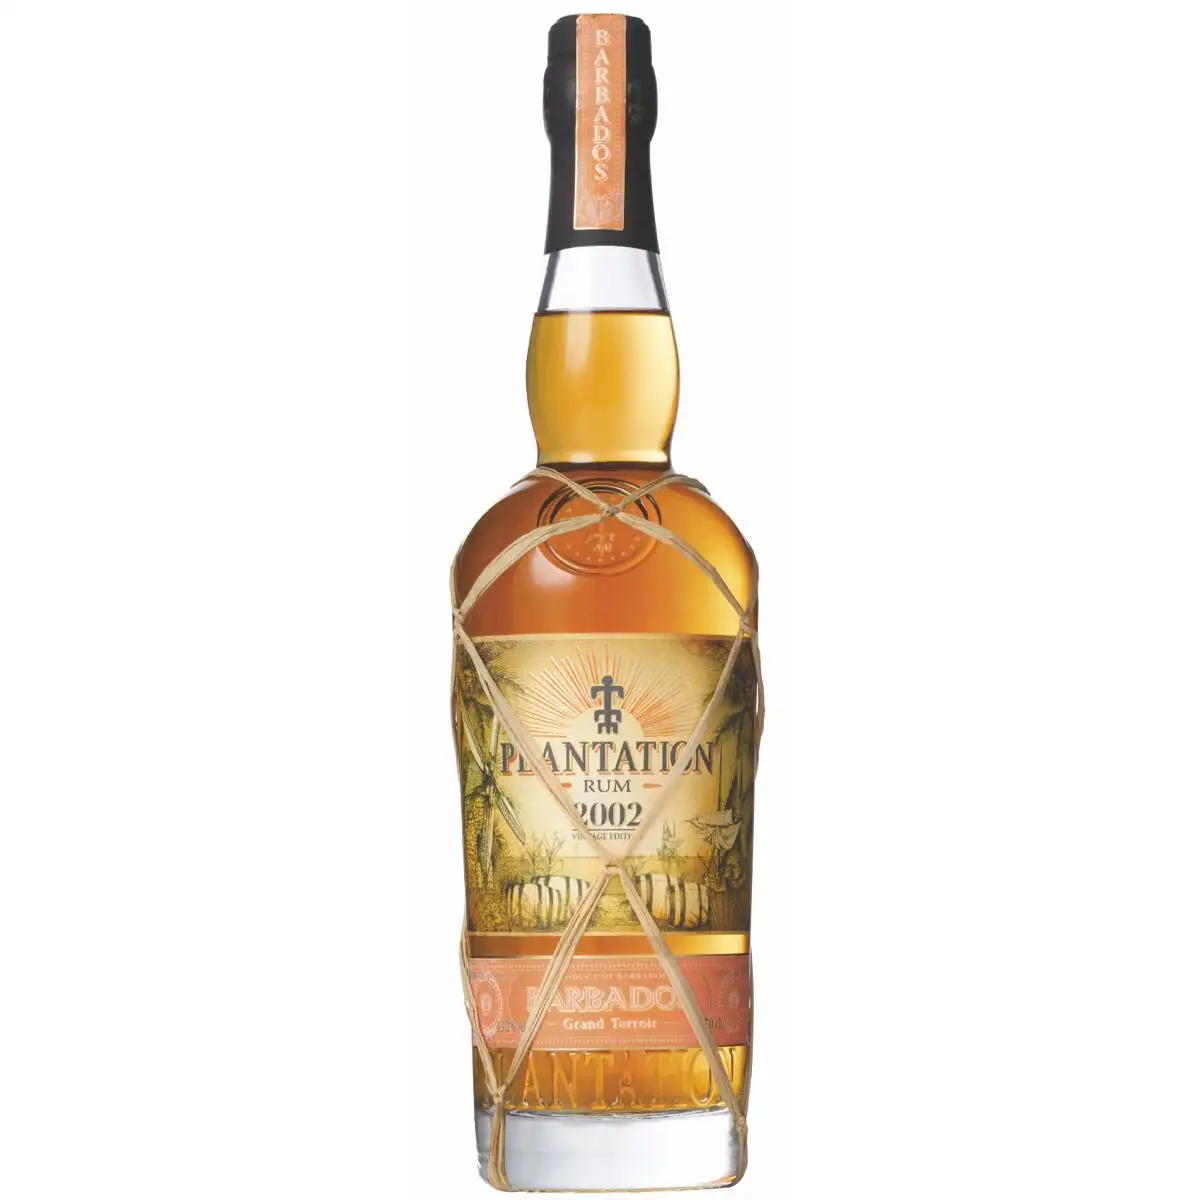 Image of the front of the bottle of the rum Plantation Barbados Grand Terroir